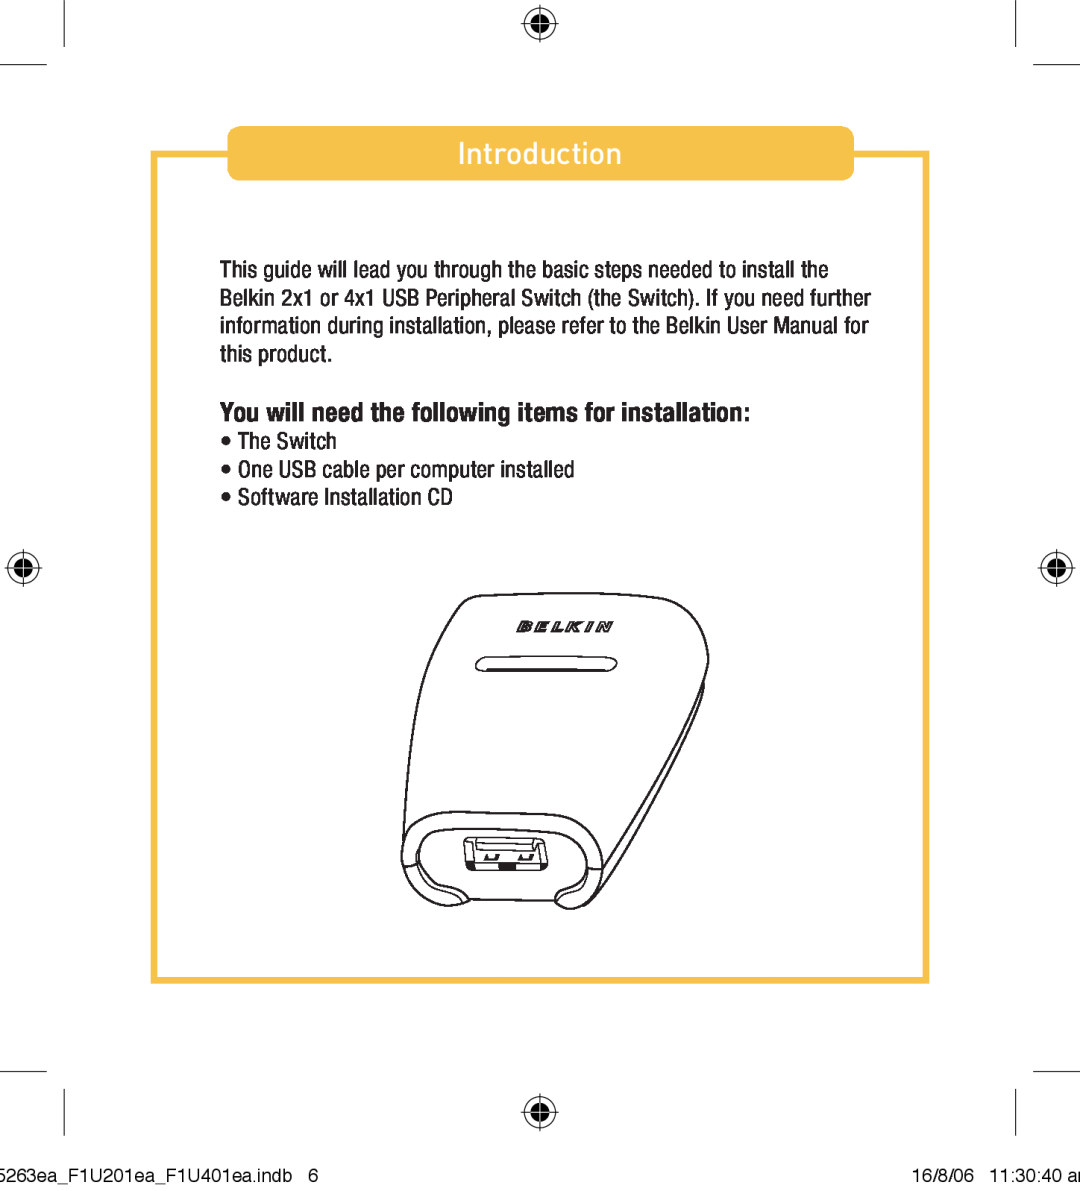 Belkin F1U201VEA1 manual Introduction, You will need the following items for installation 